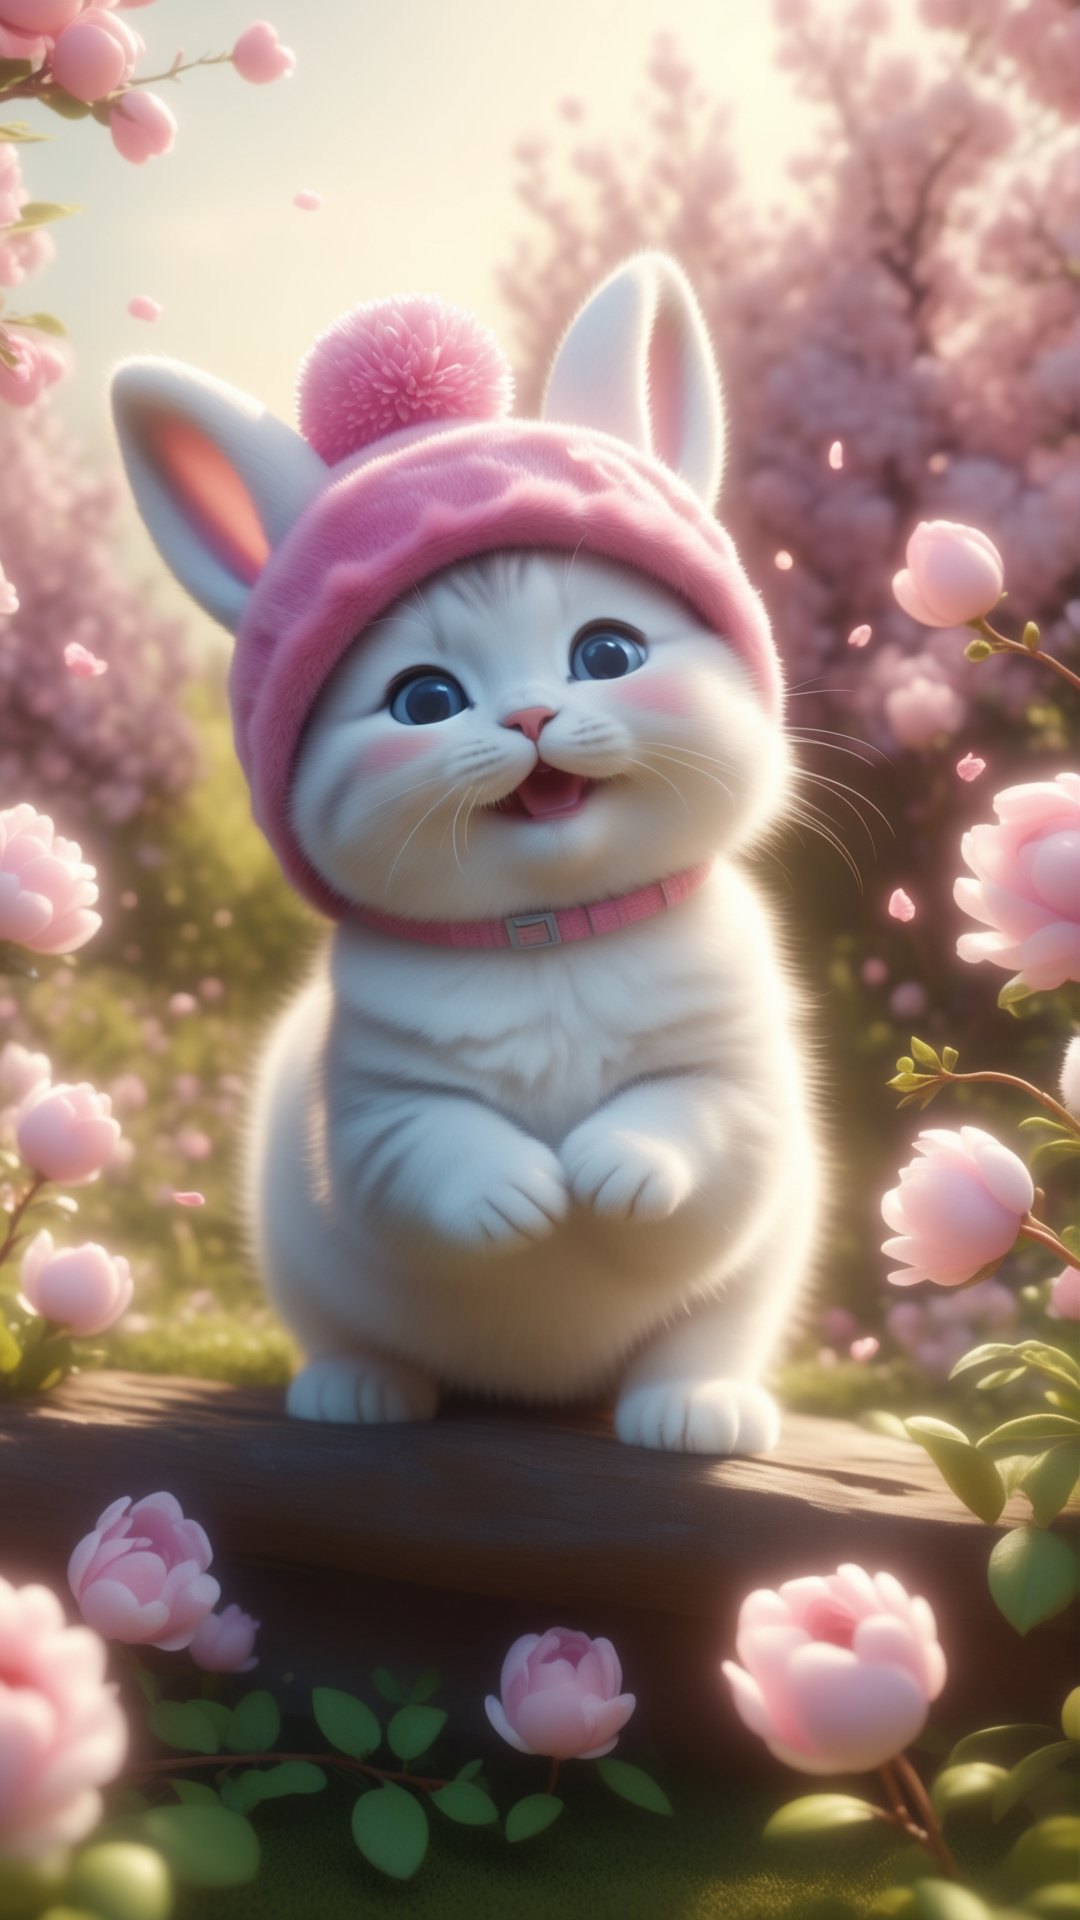 Pixar and Disney animation movie scene style, render style anime style, plum blooming, Cute chubby kitten wearing pink and white bunny hat, standing on the flowers branch, Serene, Art Hoe, Detailed Painting, adorable and lovely, fluffy and fat kitten, smile and happy, 😊 GoPro view, Blender rendering, Sharp, 